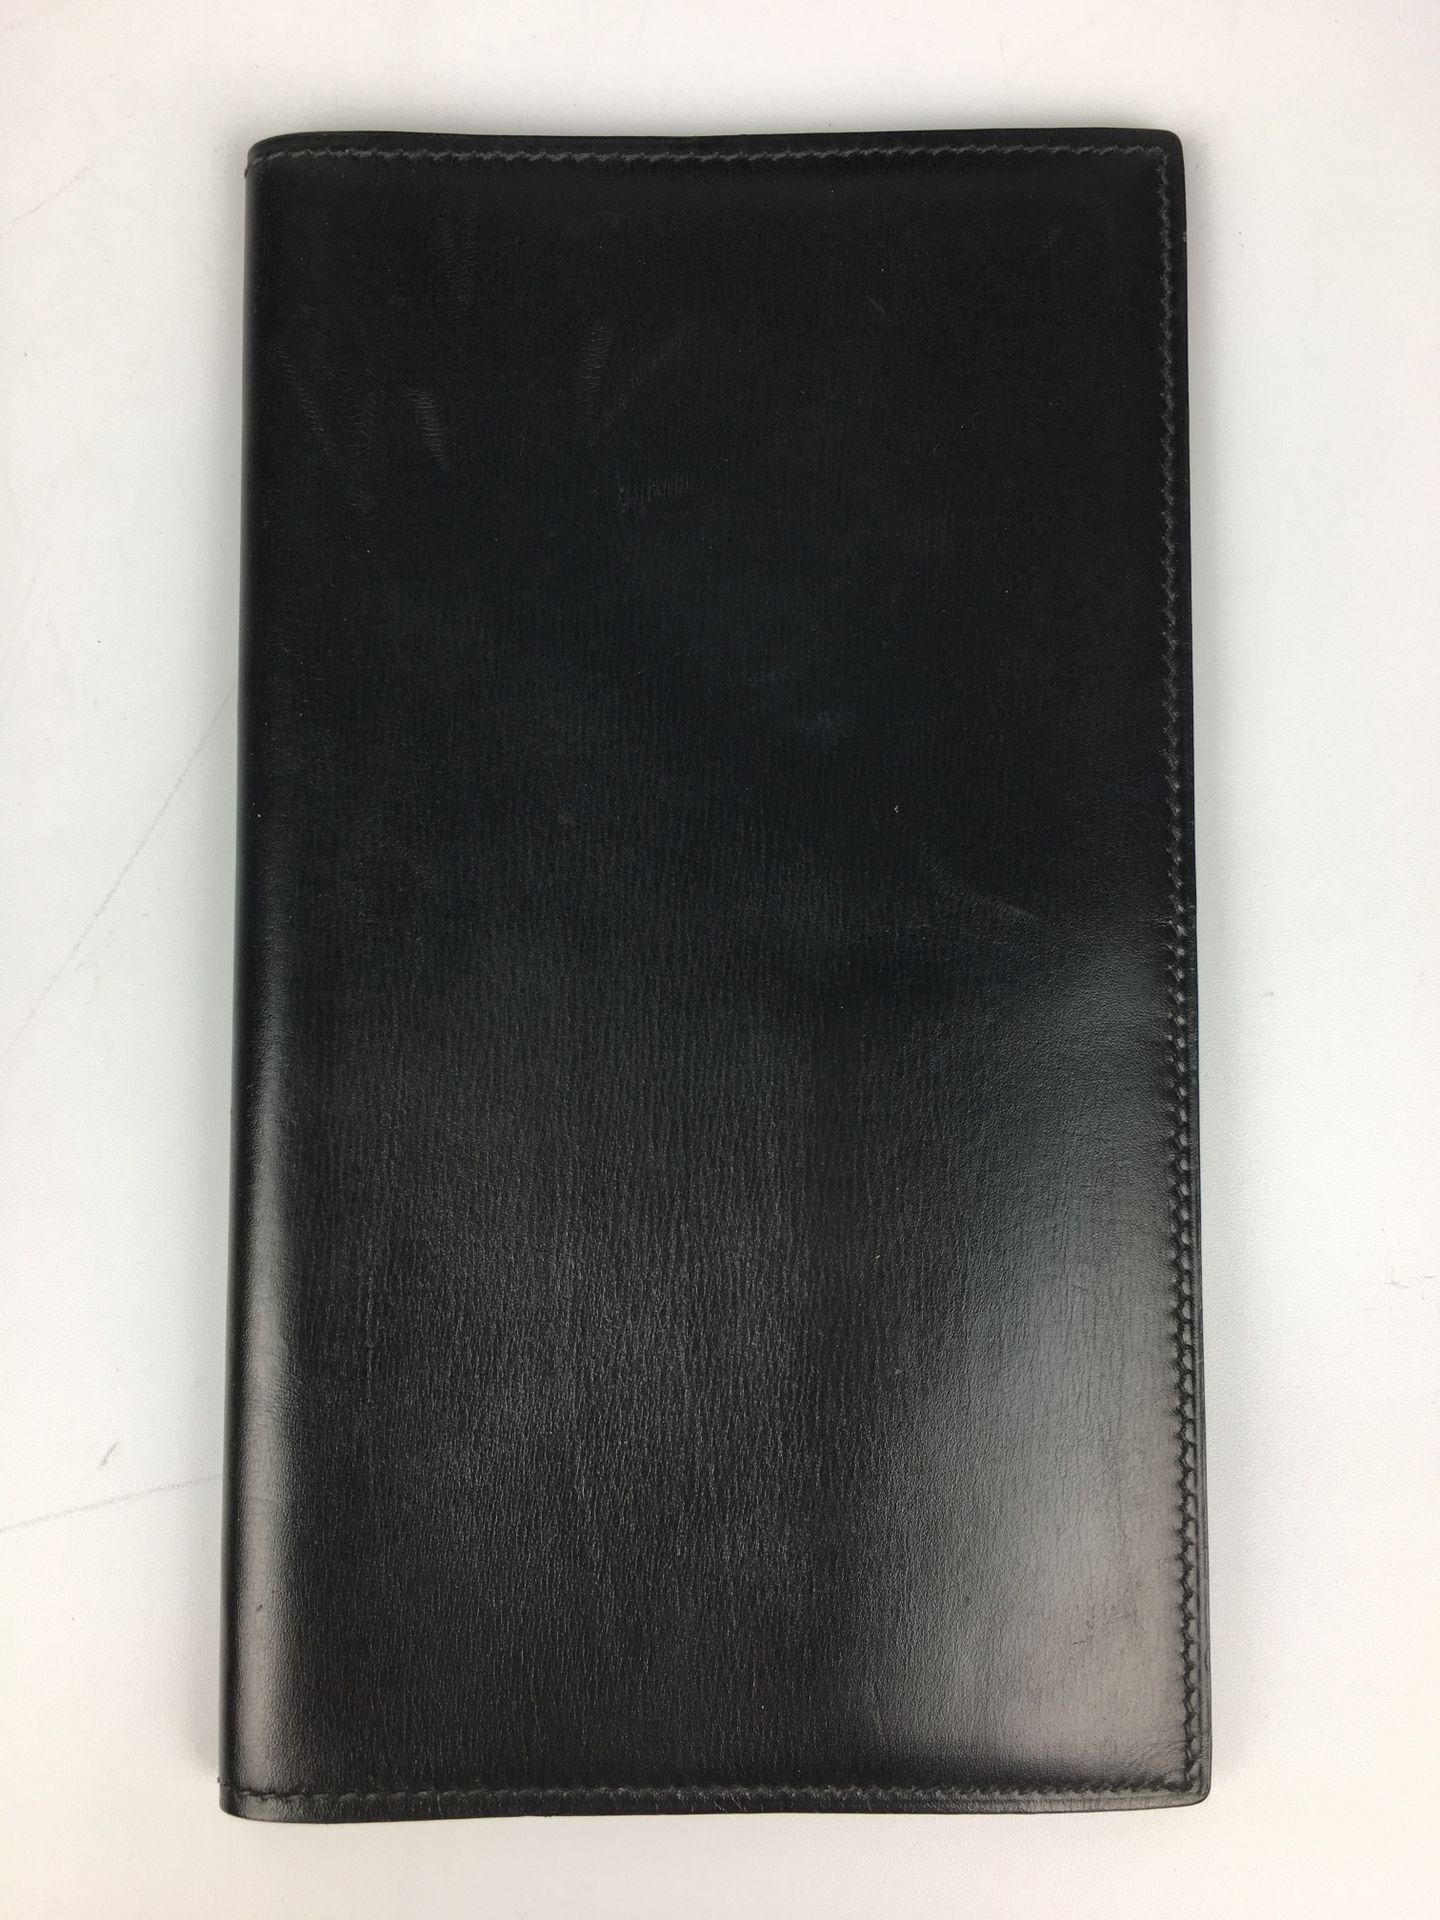 Null HERMES
Address book in black box
17.5 x 10 cm
(Small scratches)